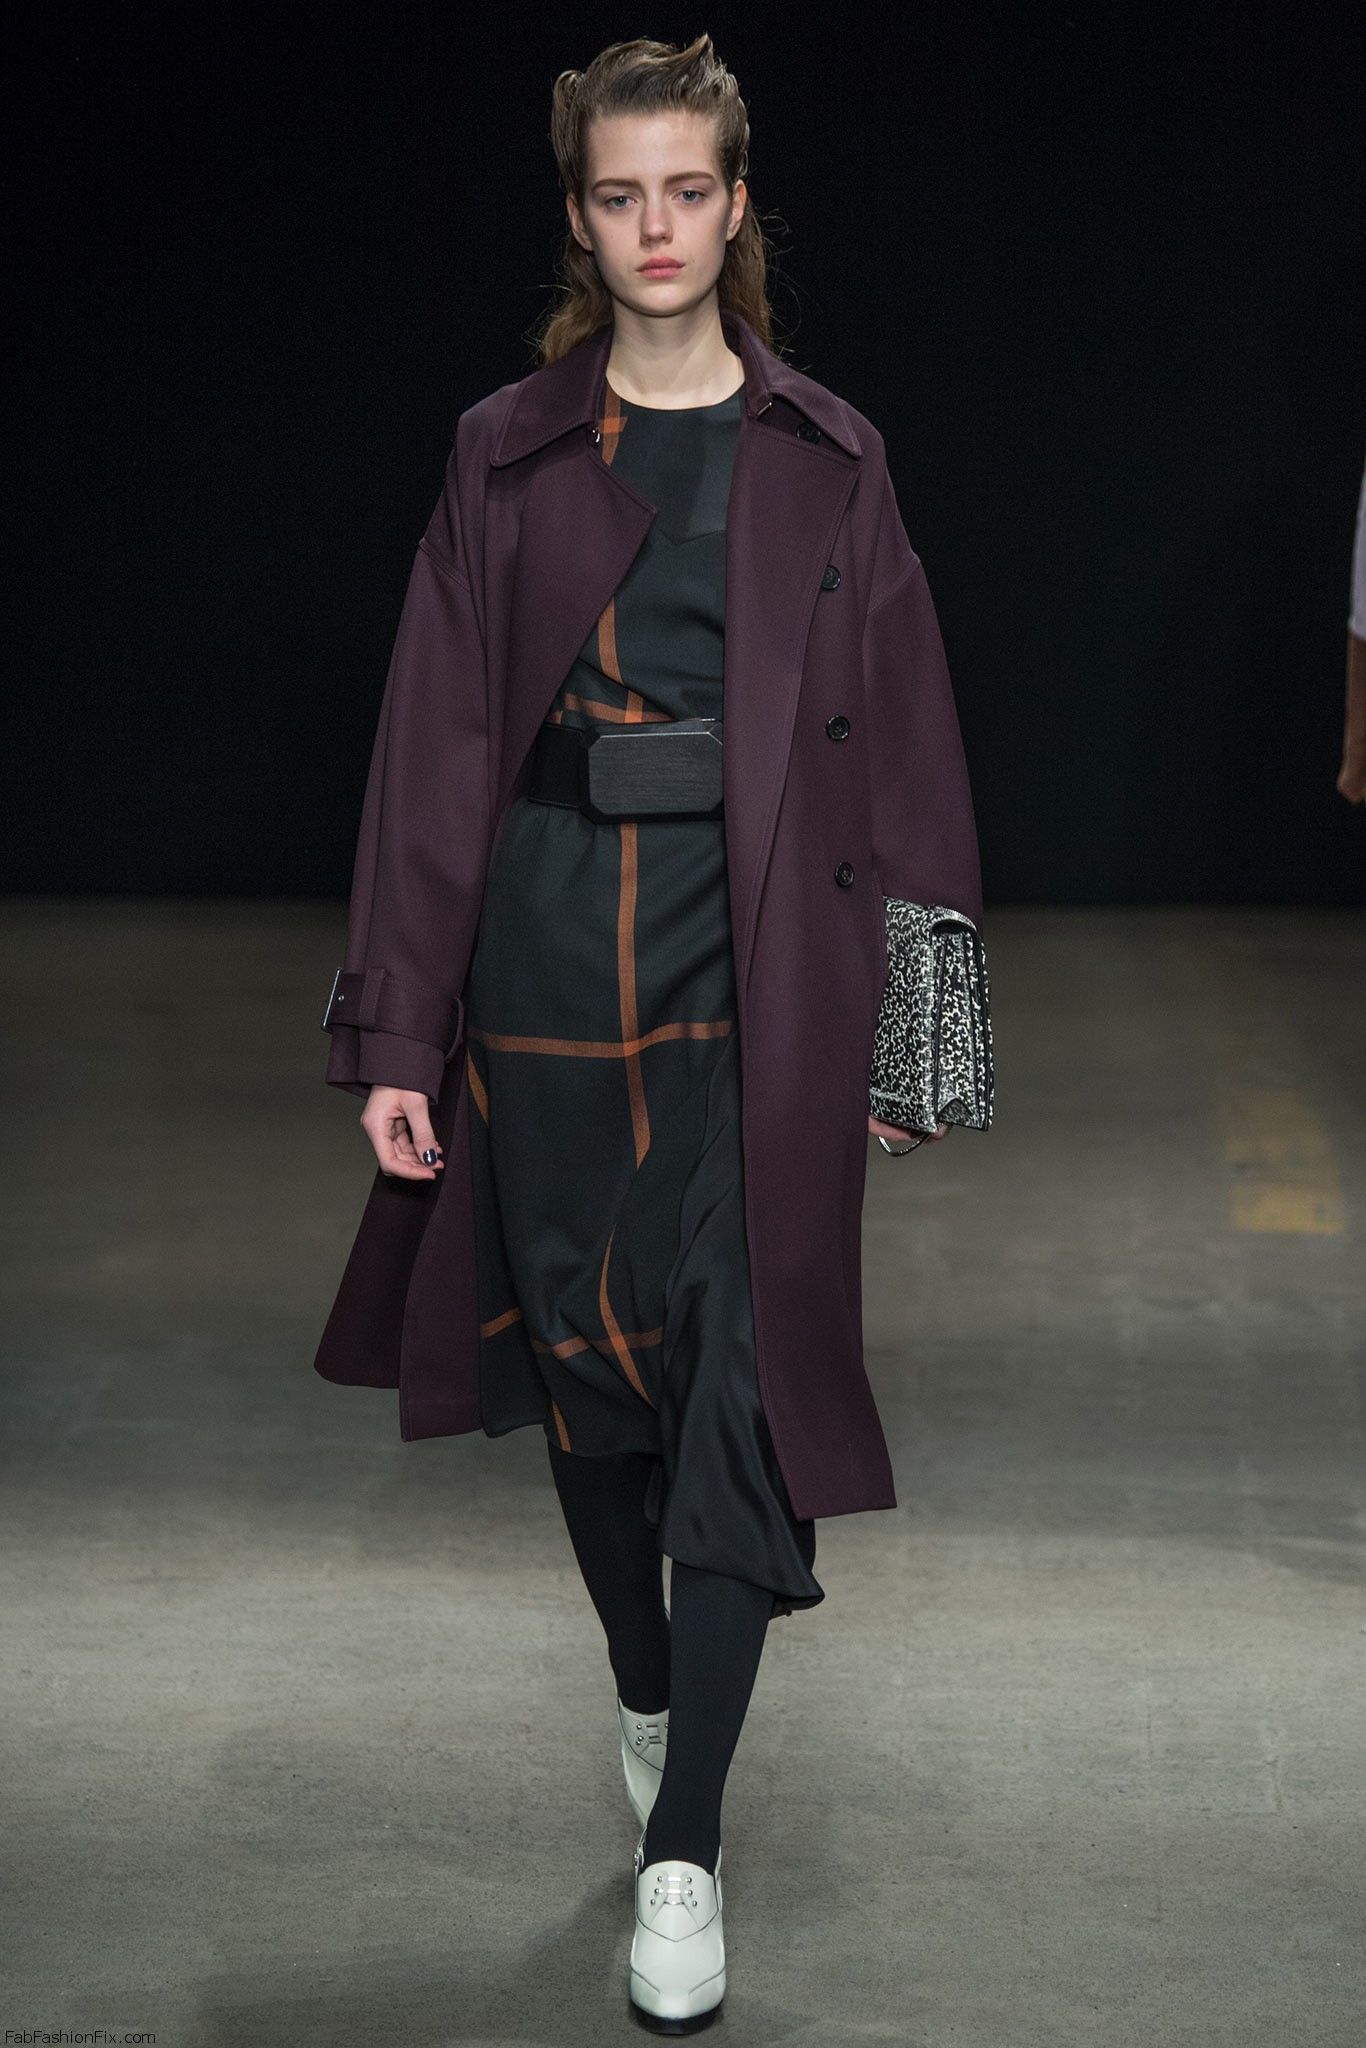 3.1 Phillip Lim fall/winter 2014 collection – New York fashion week ...